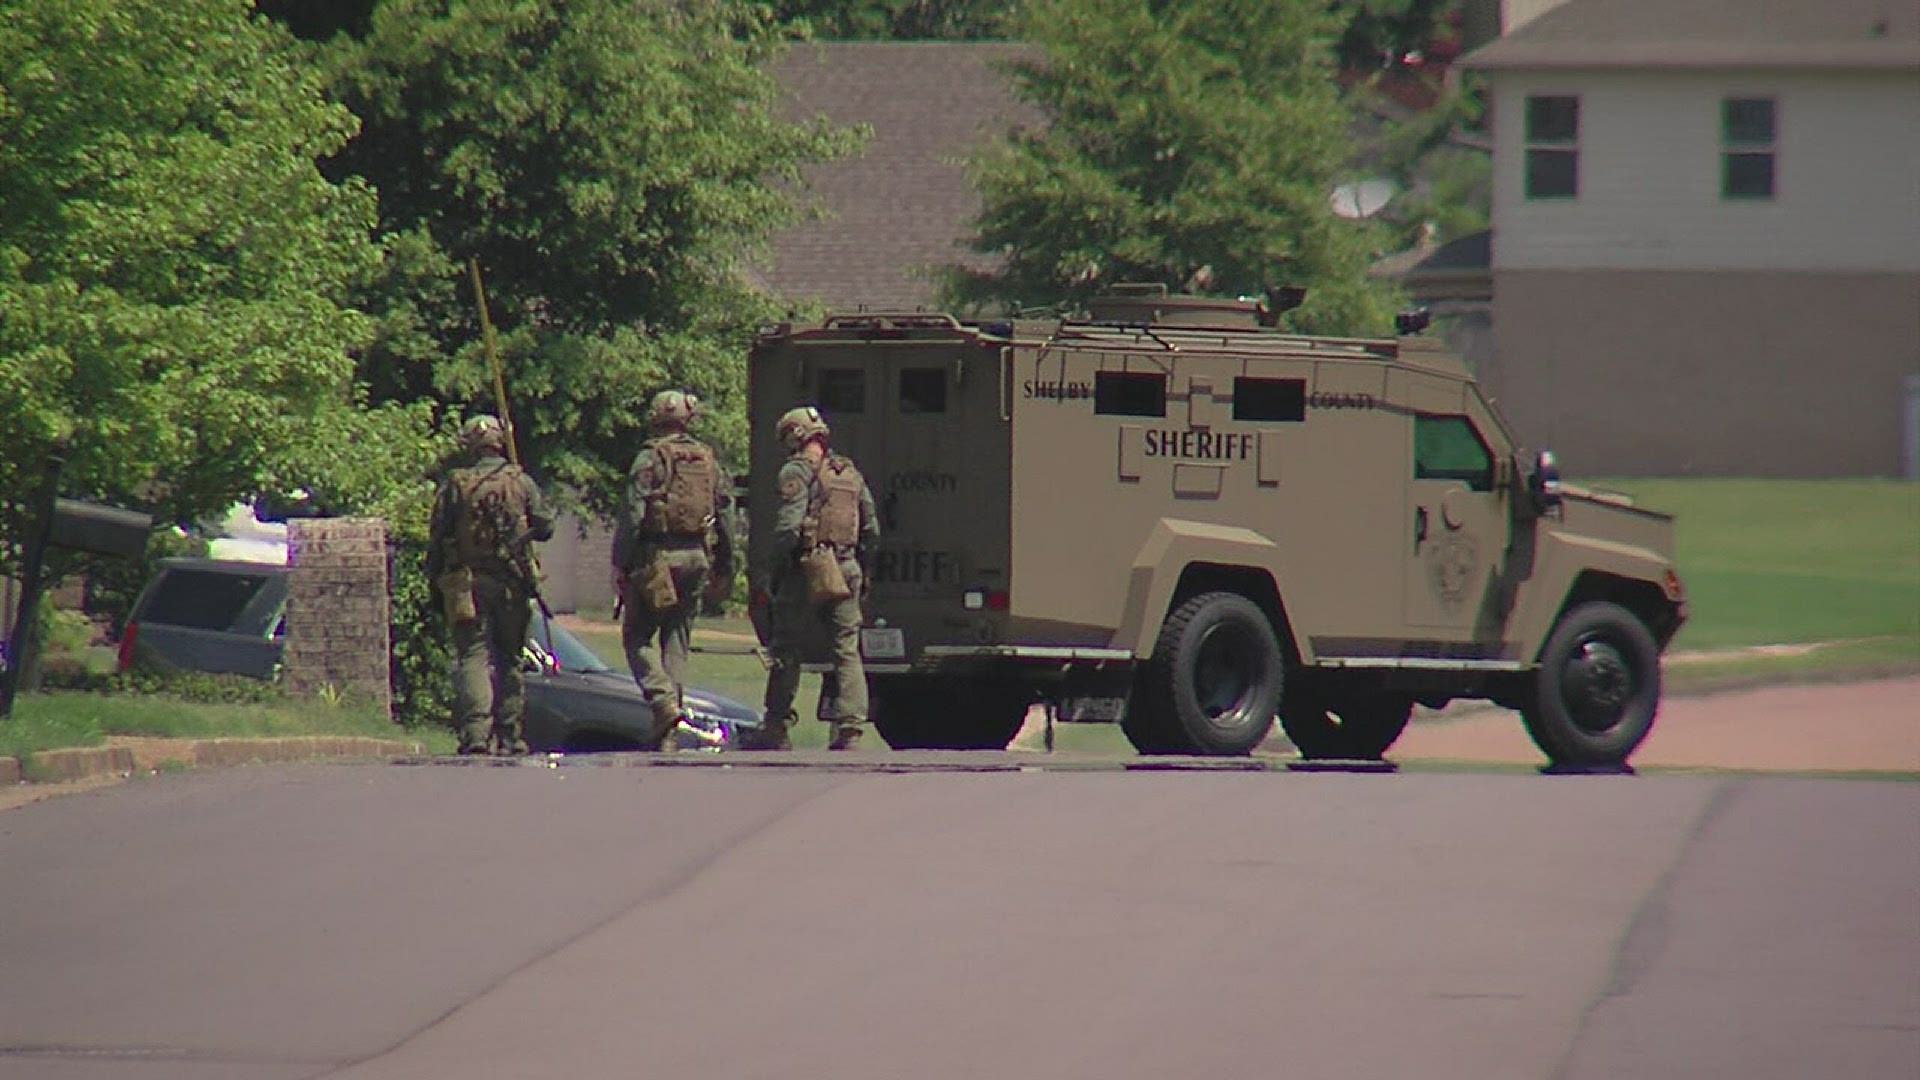 Shelby County Sheriff's Office says someone, possibly armed with a weapon, barricaded in a home.